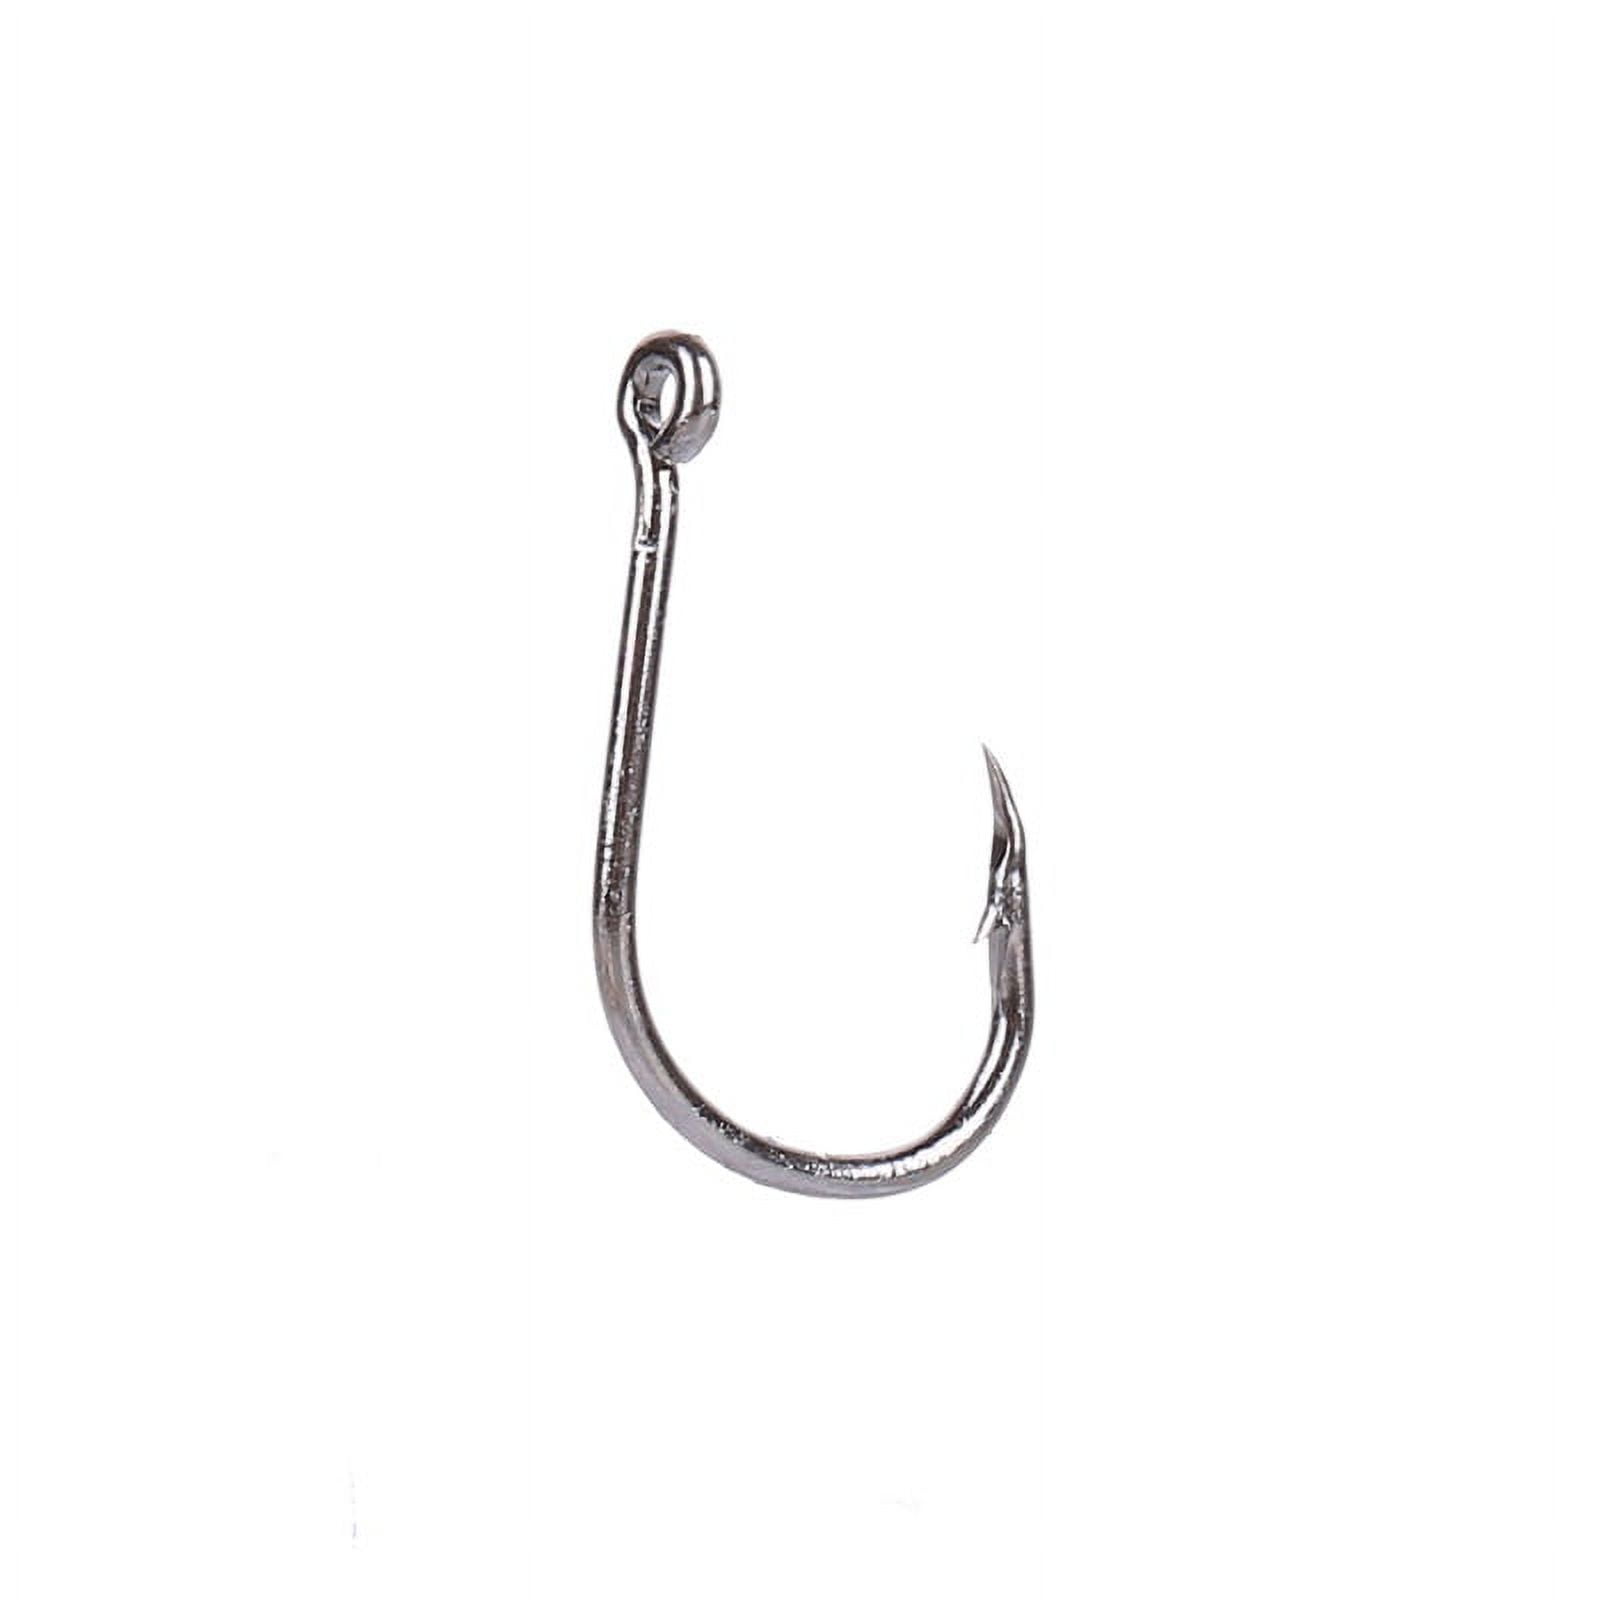 50PCS] Hight Carbon steel 60 degree jig hook Fishing Hooks 32786 Size #1  #1/0 #2/0 #3/0 #4/0 #5/0 #6/0 #7/0 #8/0 - Price history & Review, AliExpress Seller - ICERIO Store